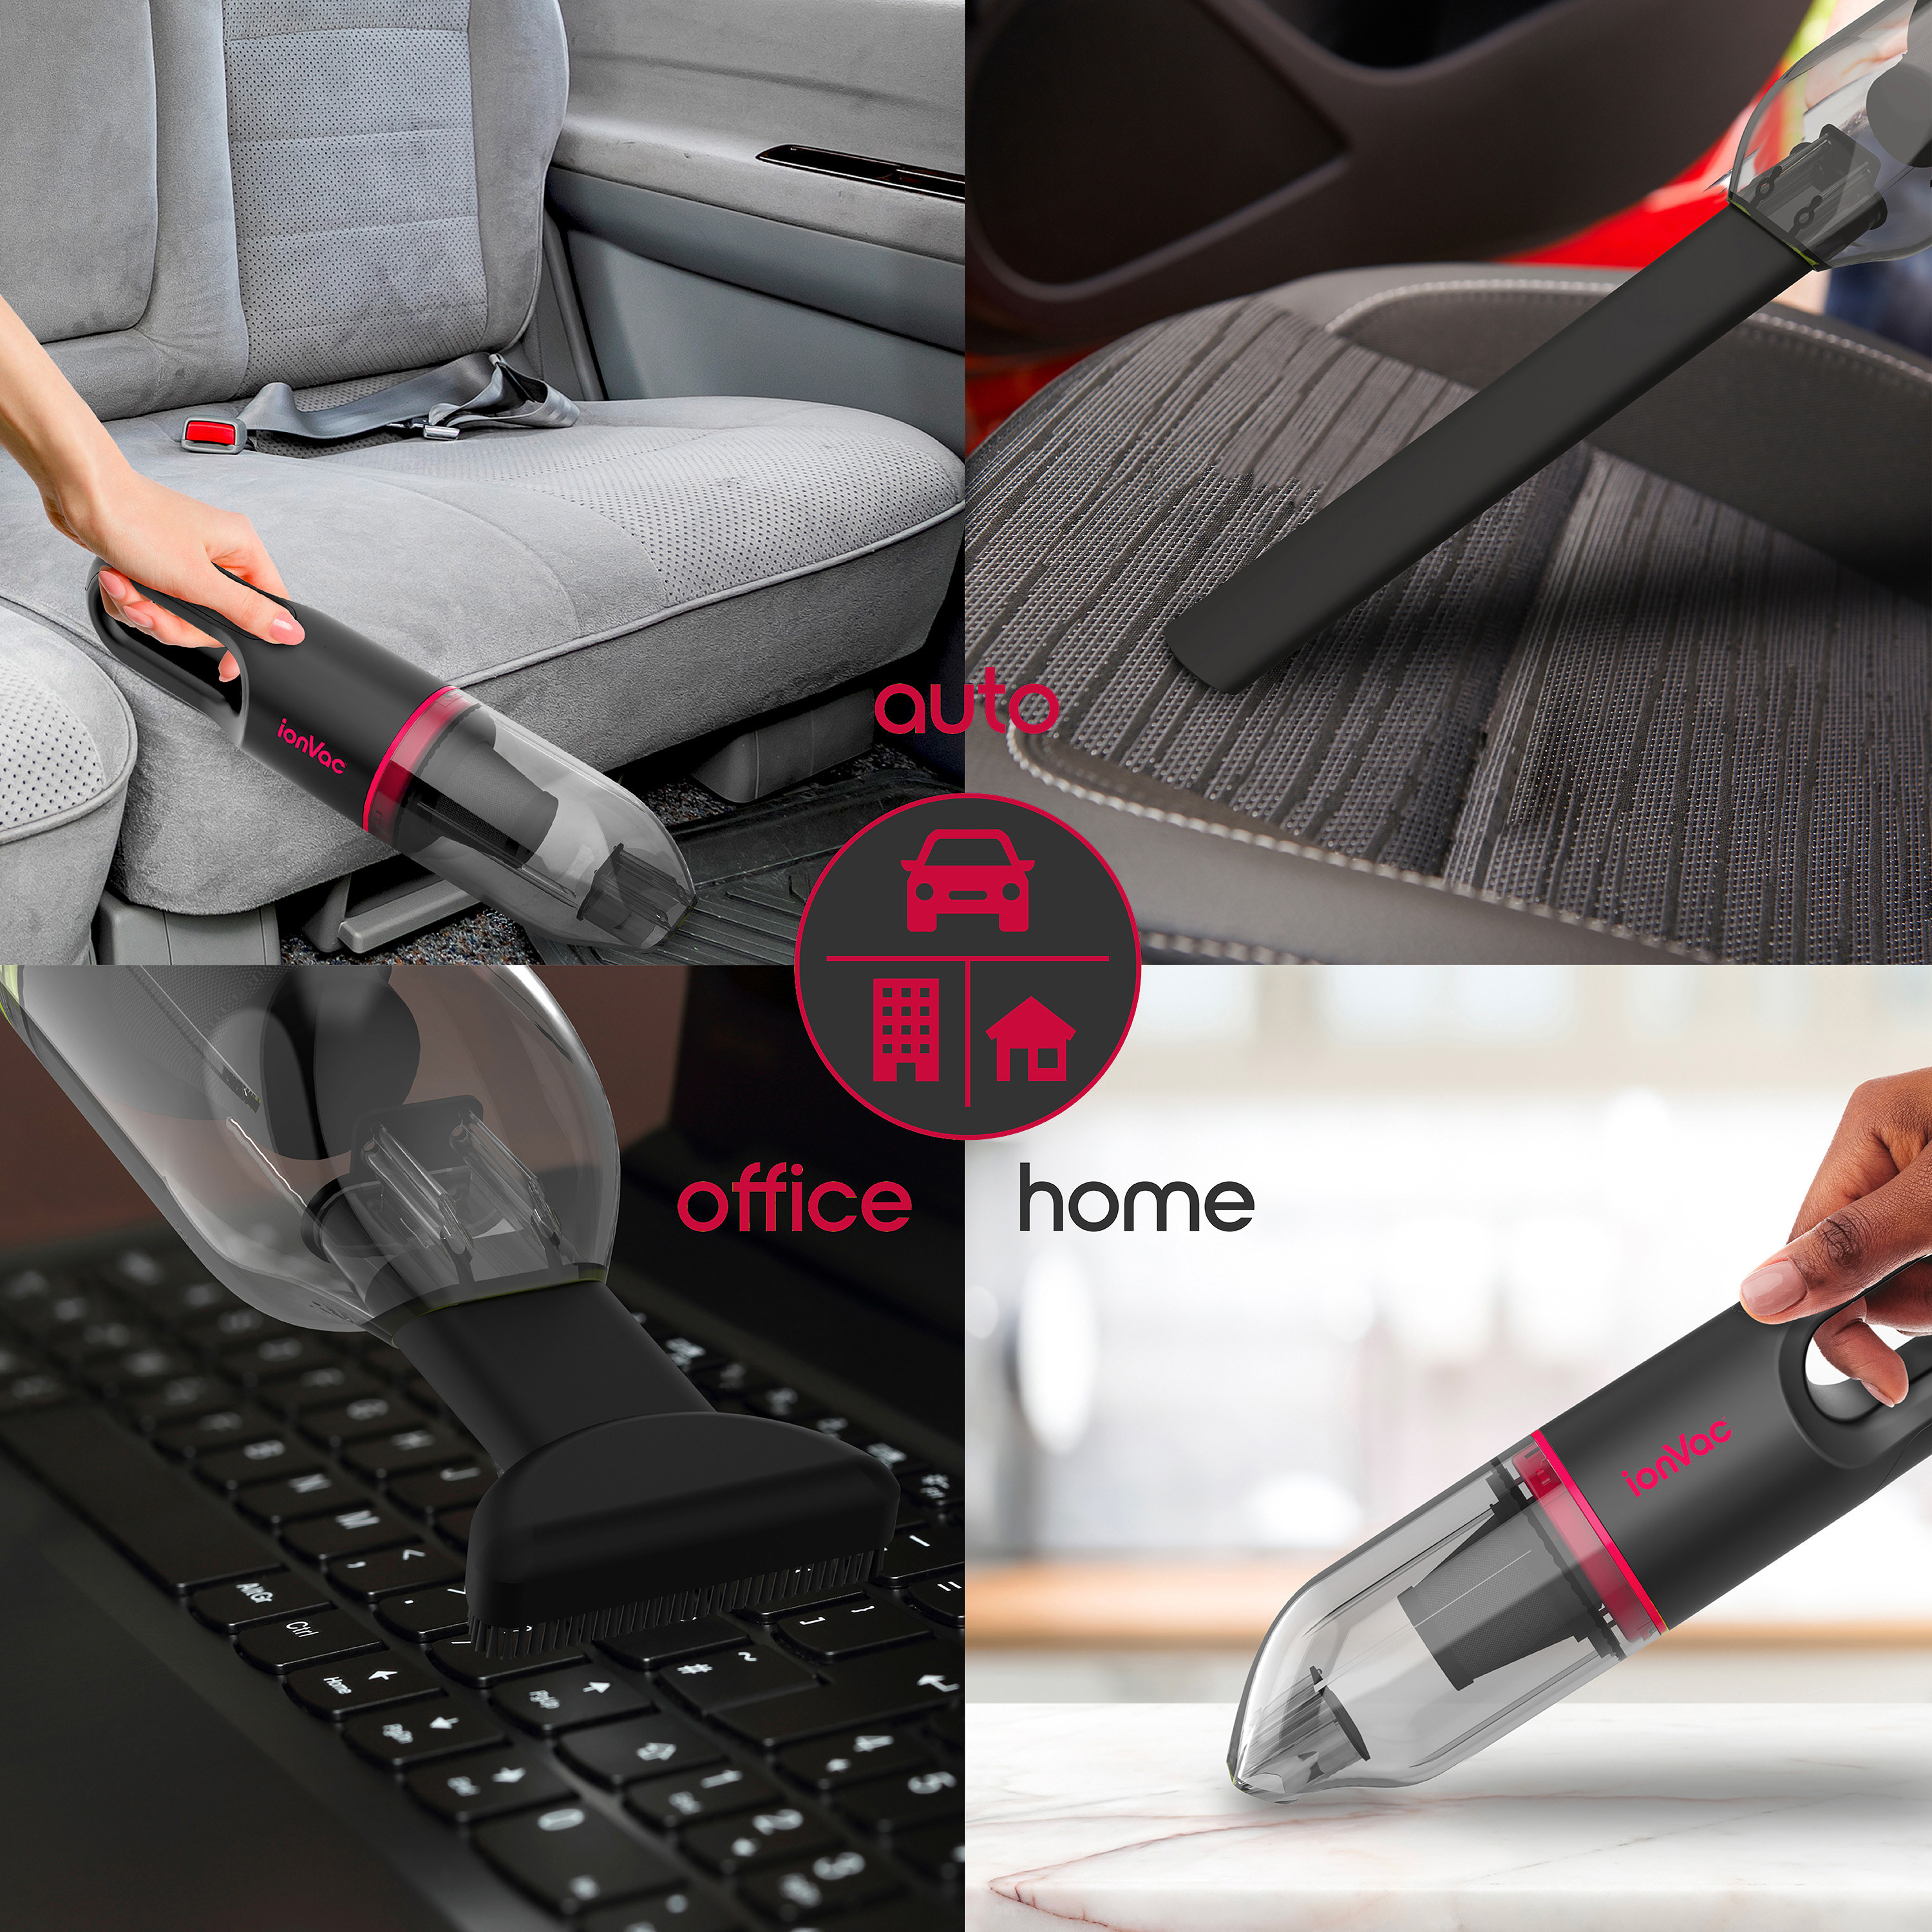 person vacuuming in car office and home